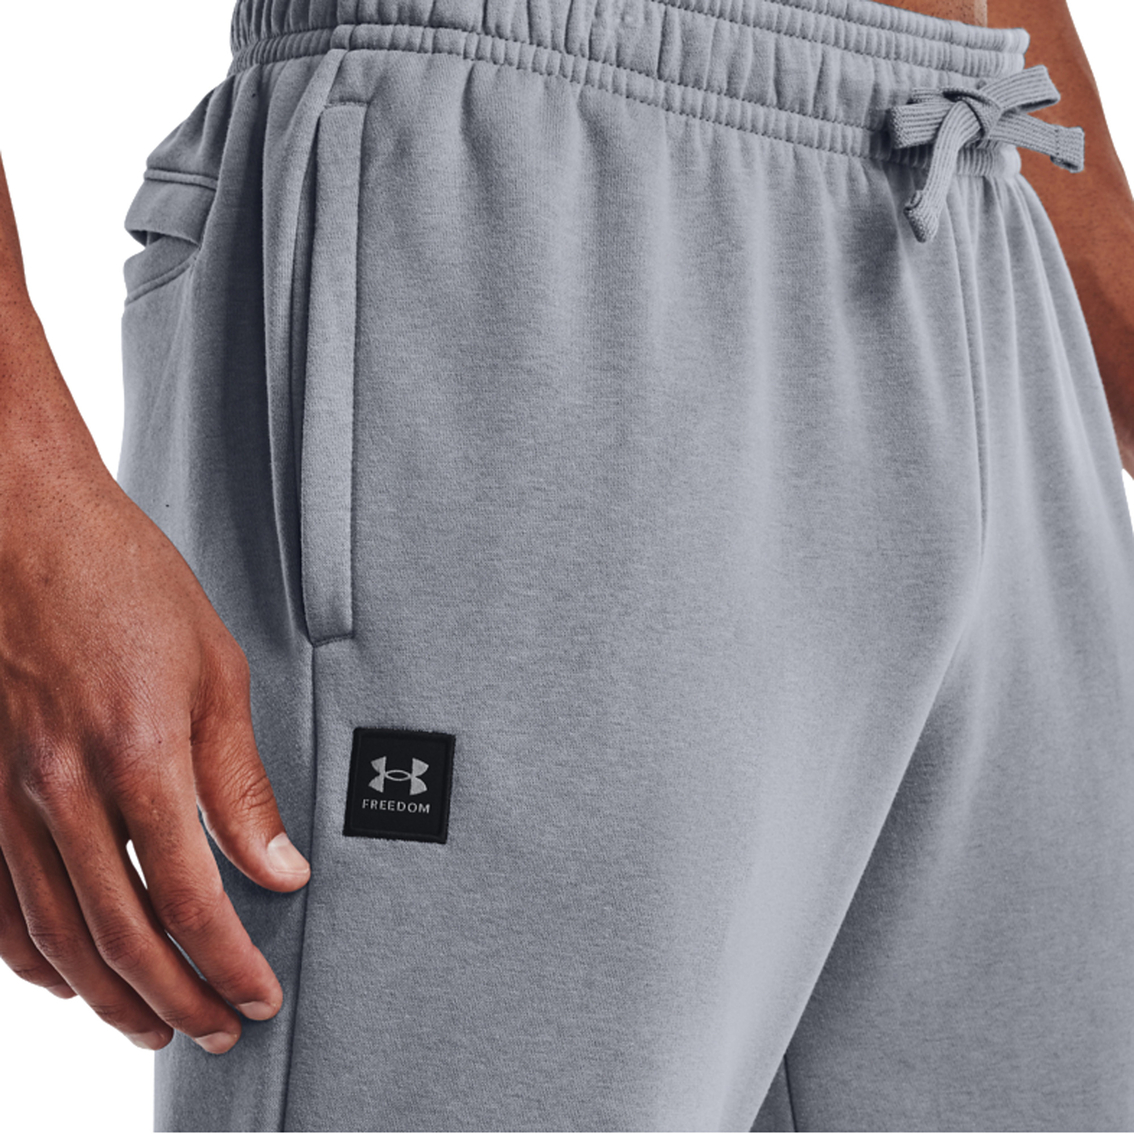 Under Armour Freedom Rival Joggers - Image 4 of 6